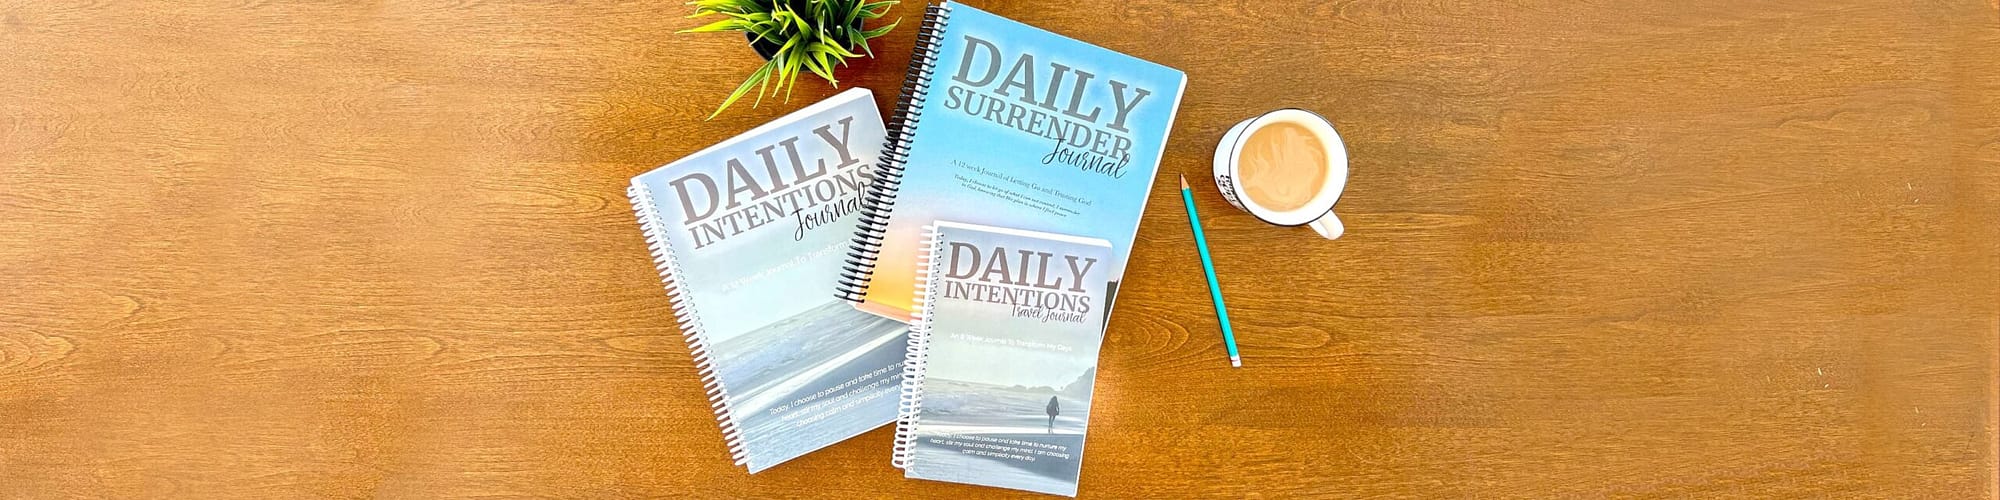 Daily Intentions Journals